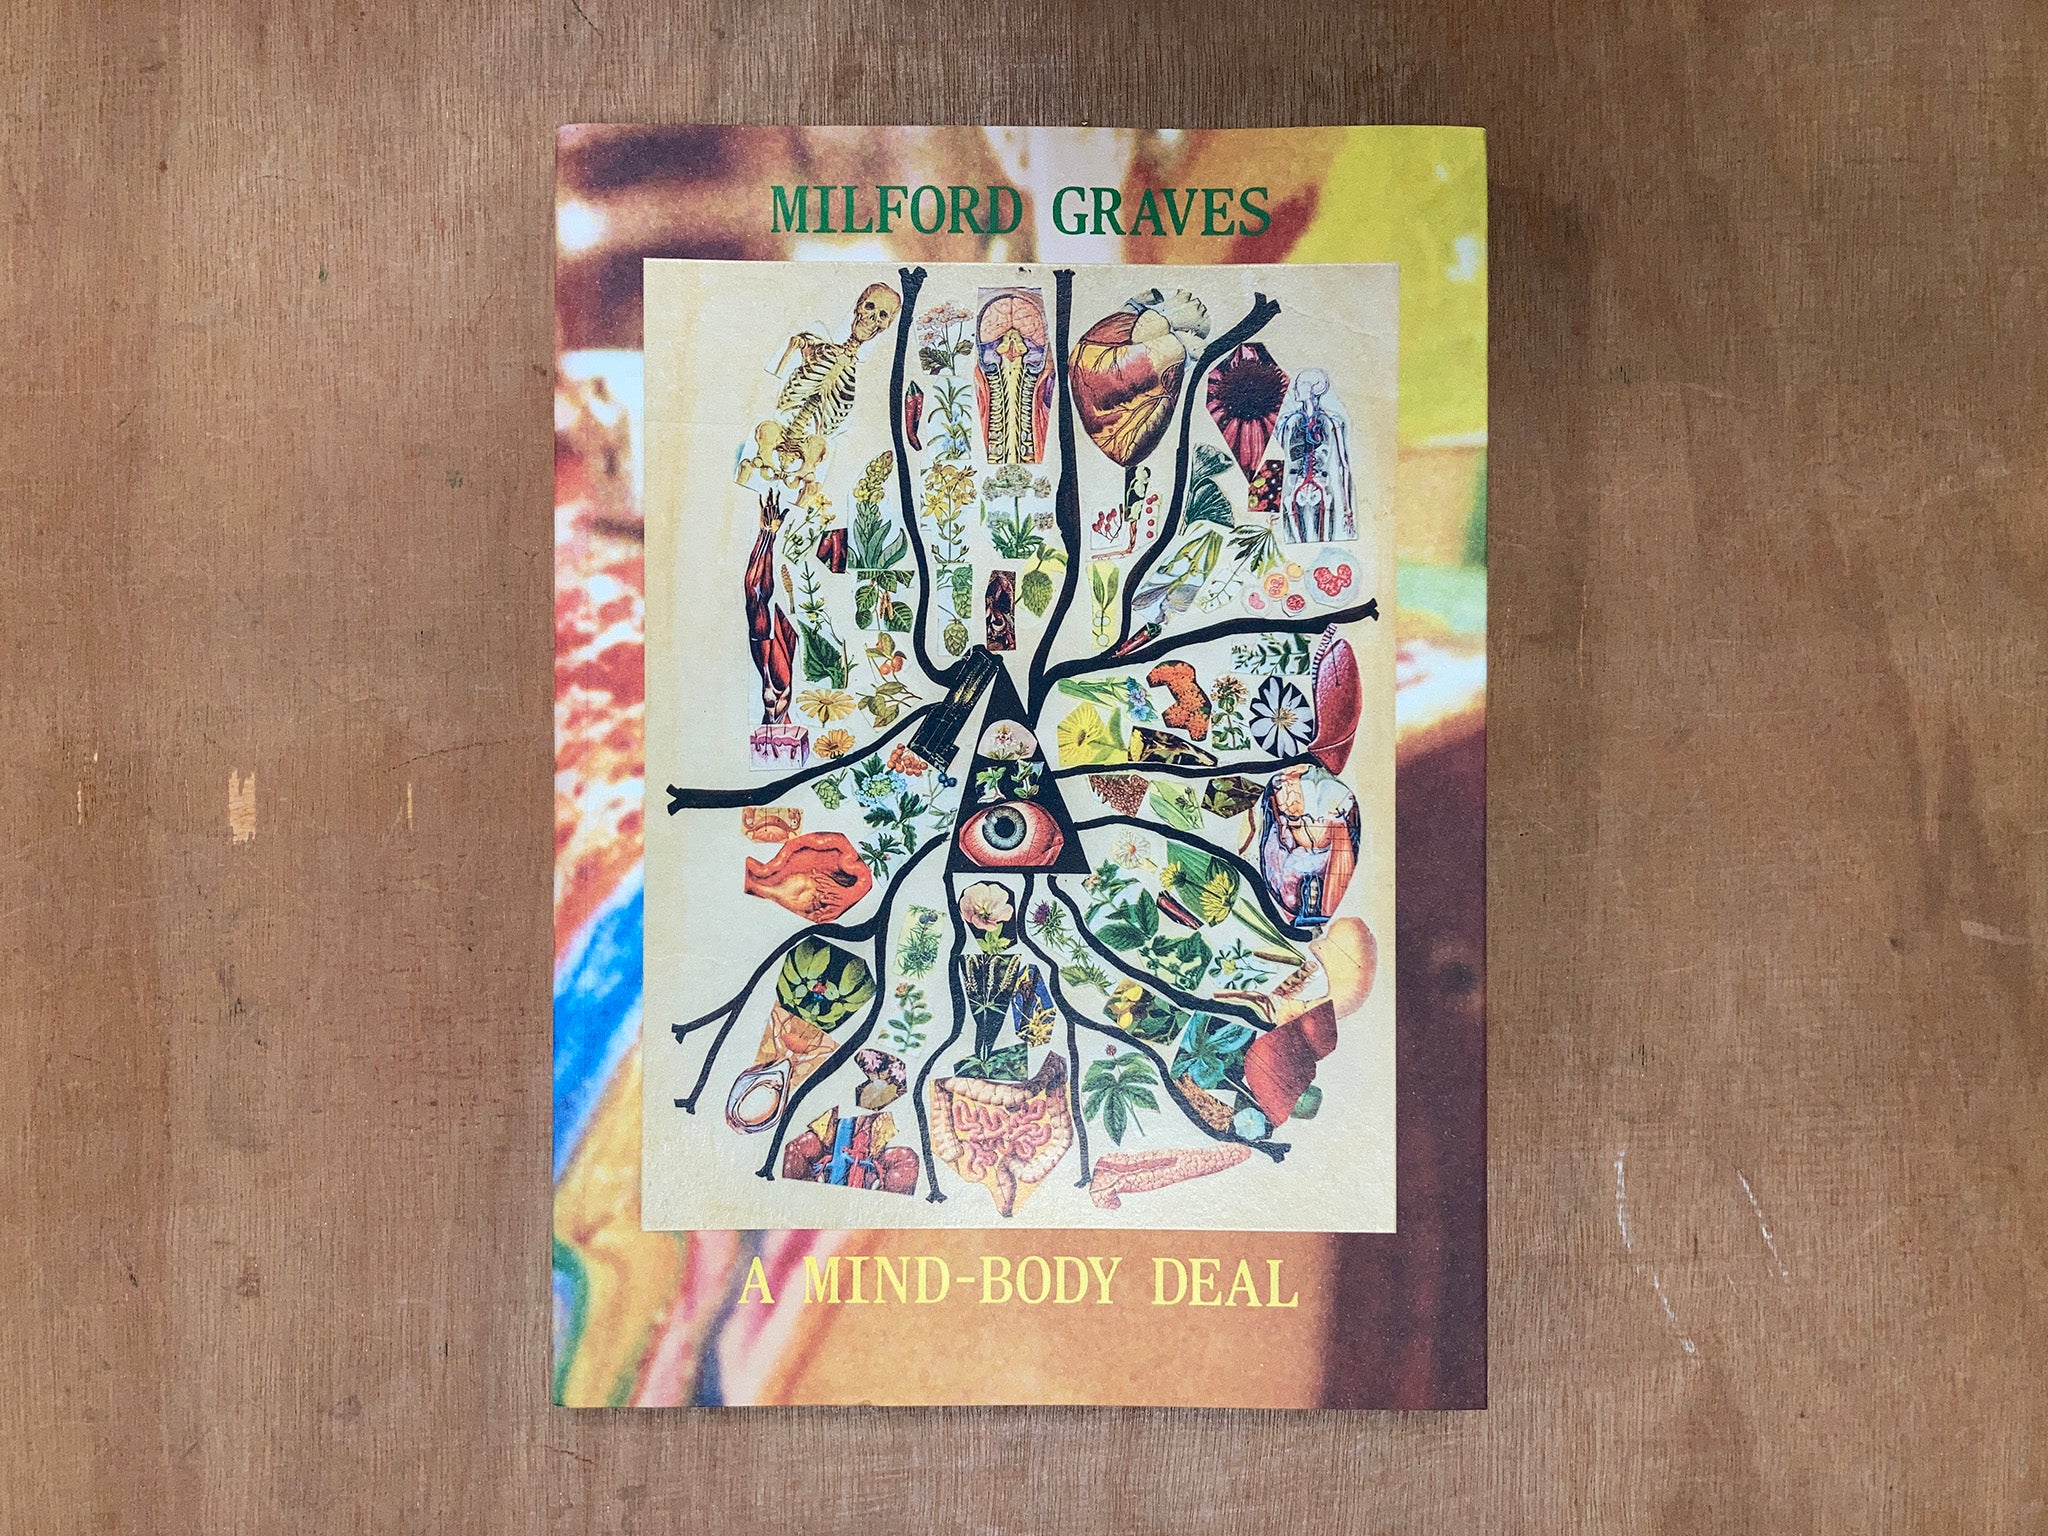 MILFORD GRAVES: A MIND-BODY DEAL edited by Anthony Elms, Celeste DiNucci, and Mark Christman